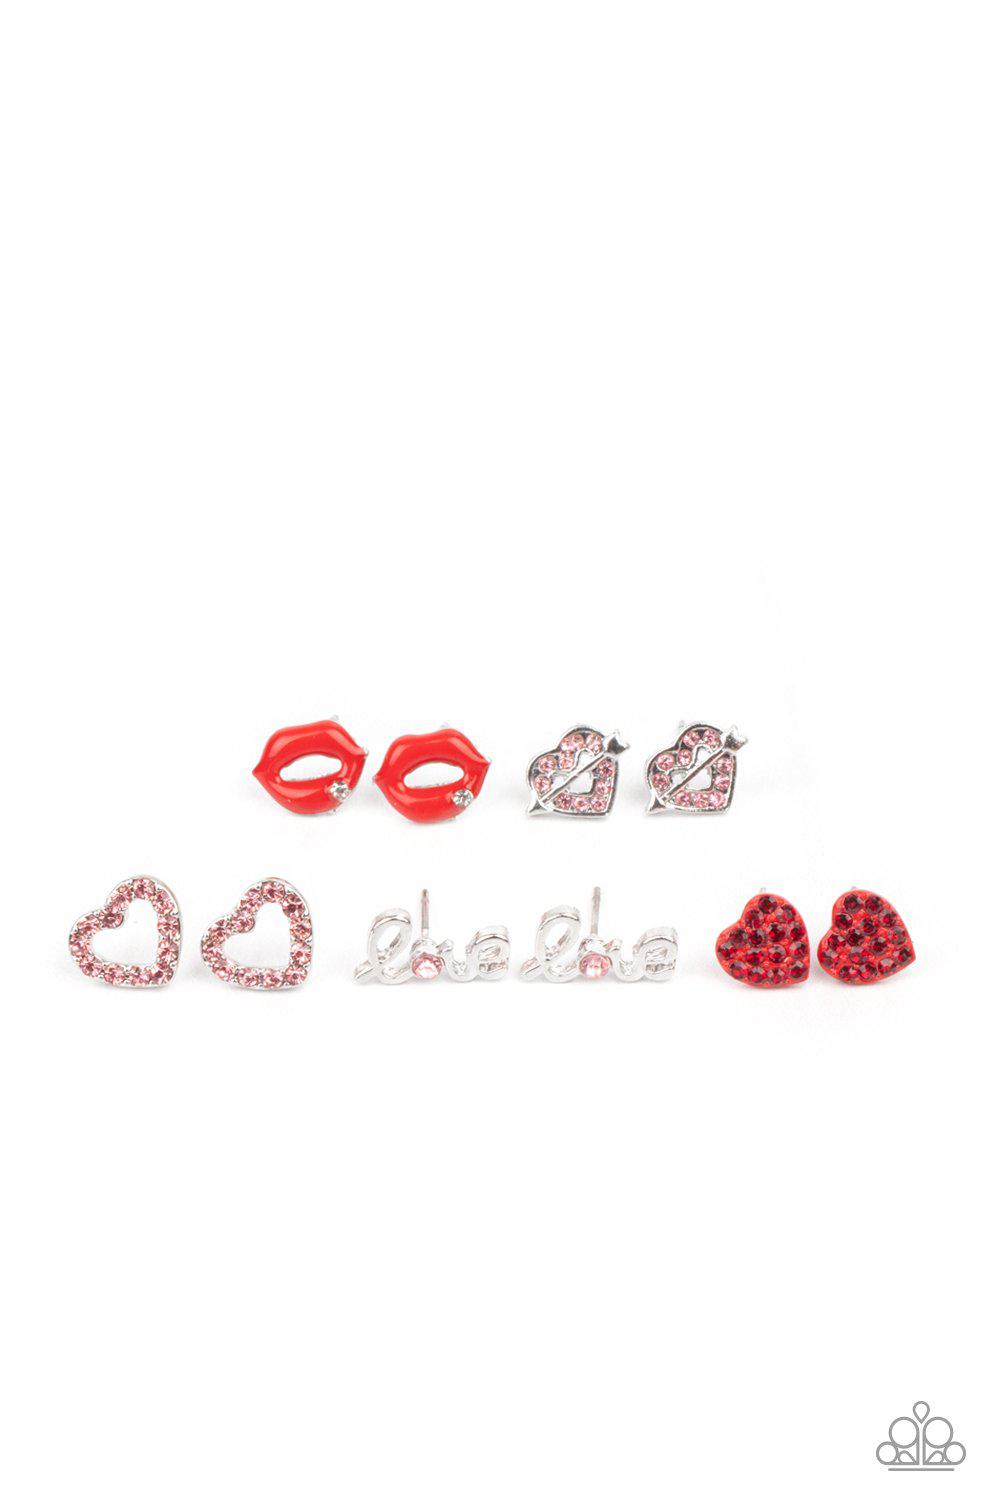 Starlet Shimmer Children&#39;s Valentine Rhinestone Post Earrings 2021 - Paparazzi Accessories (set of 5) - Full set -CarasShop.com - $5 Jewelry by Cara Jewels